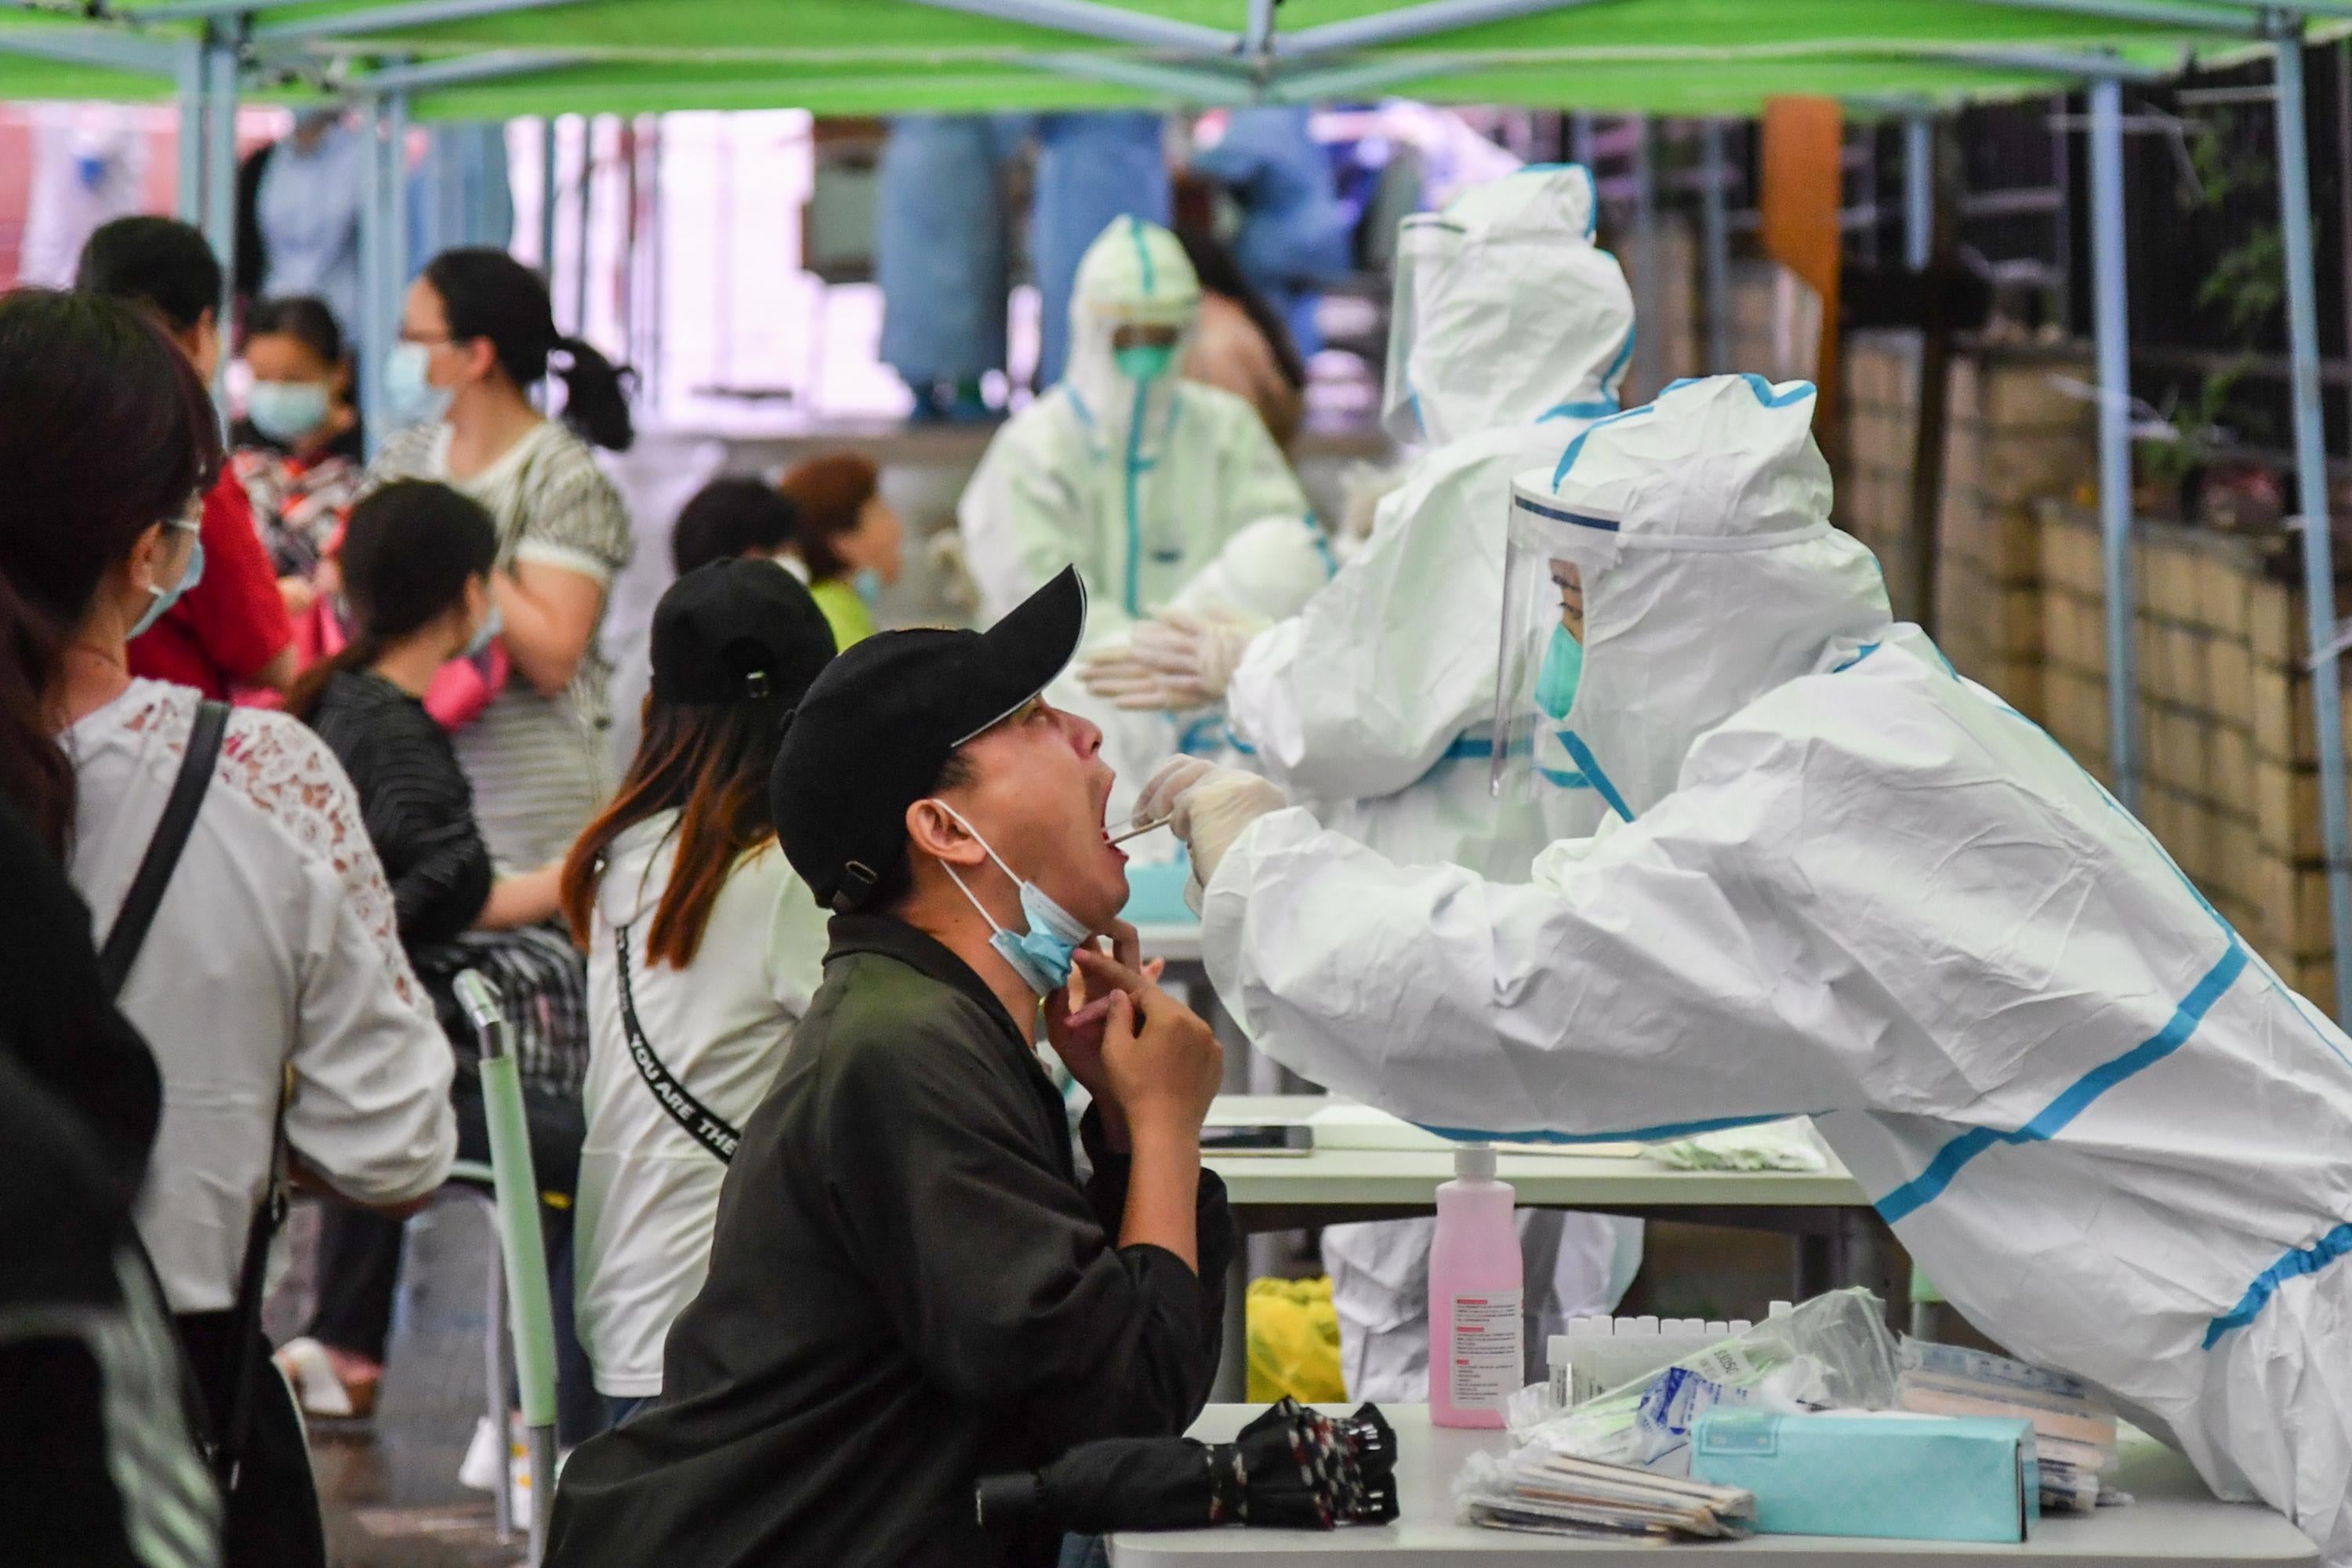 A man, sitting down, opens his mouth wide as a medical worker in personal protective equipment takes a swab sample from his throat. Others wait in line behind the man. 